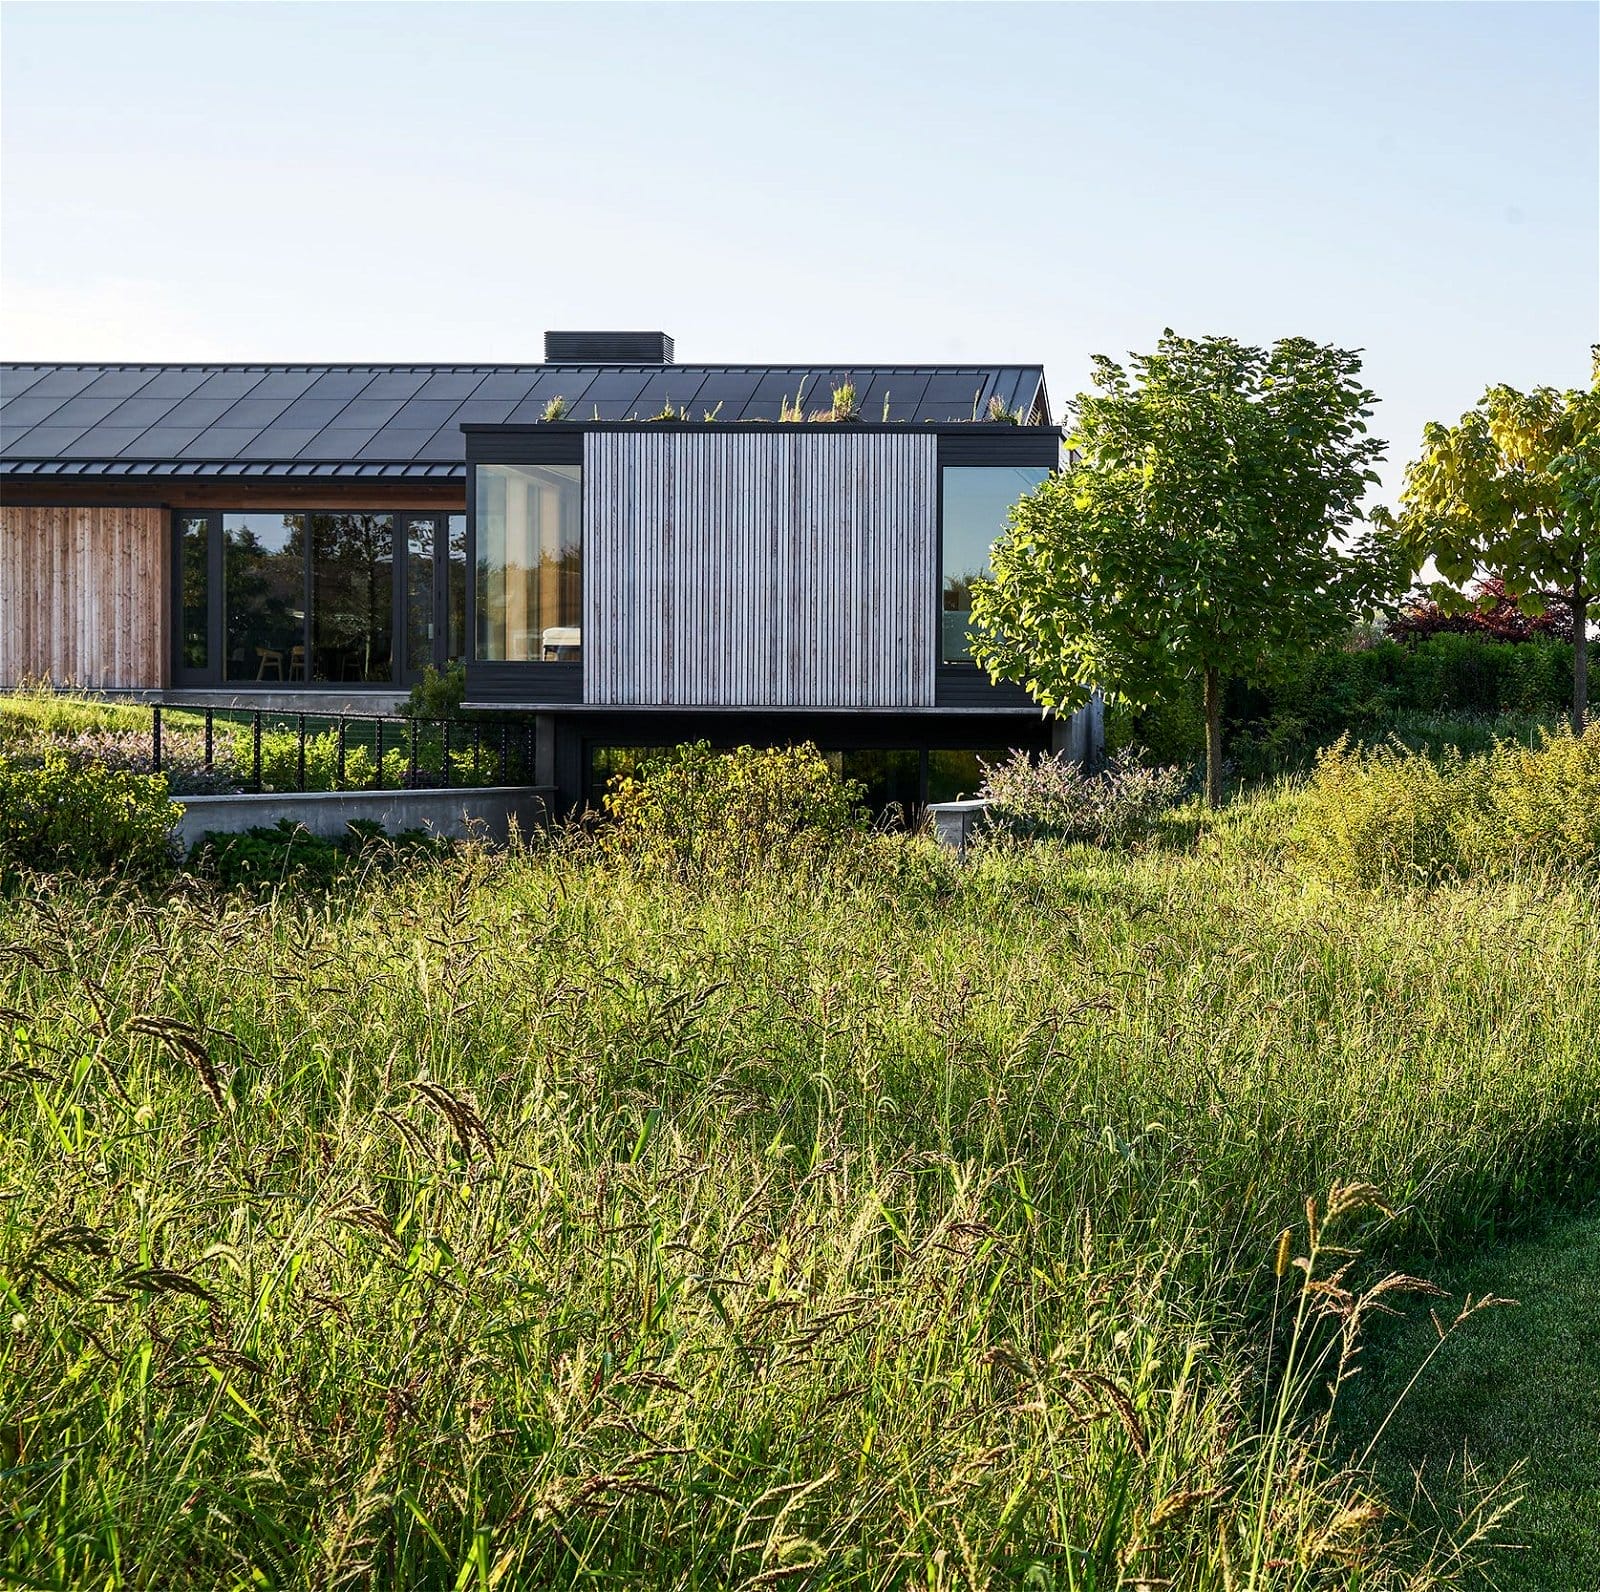 This Deceptively Simple Hamptons Retreat Is an Invitation to Take a Load Off